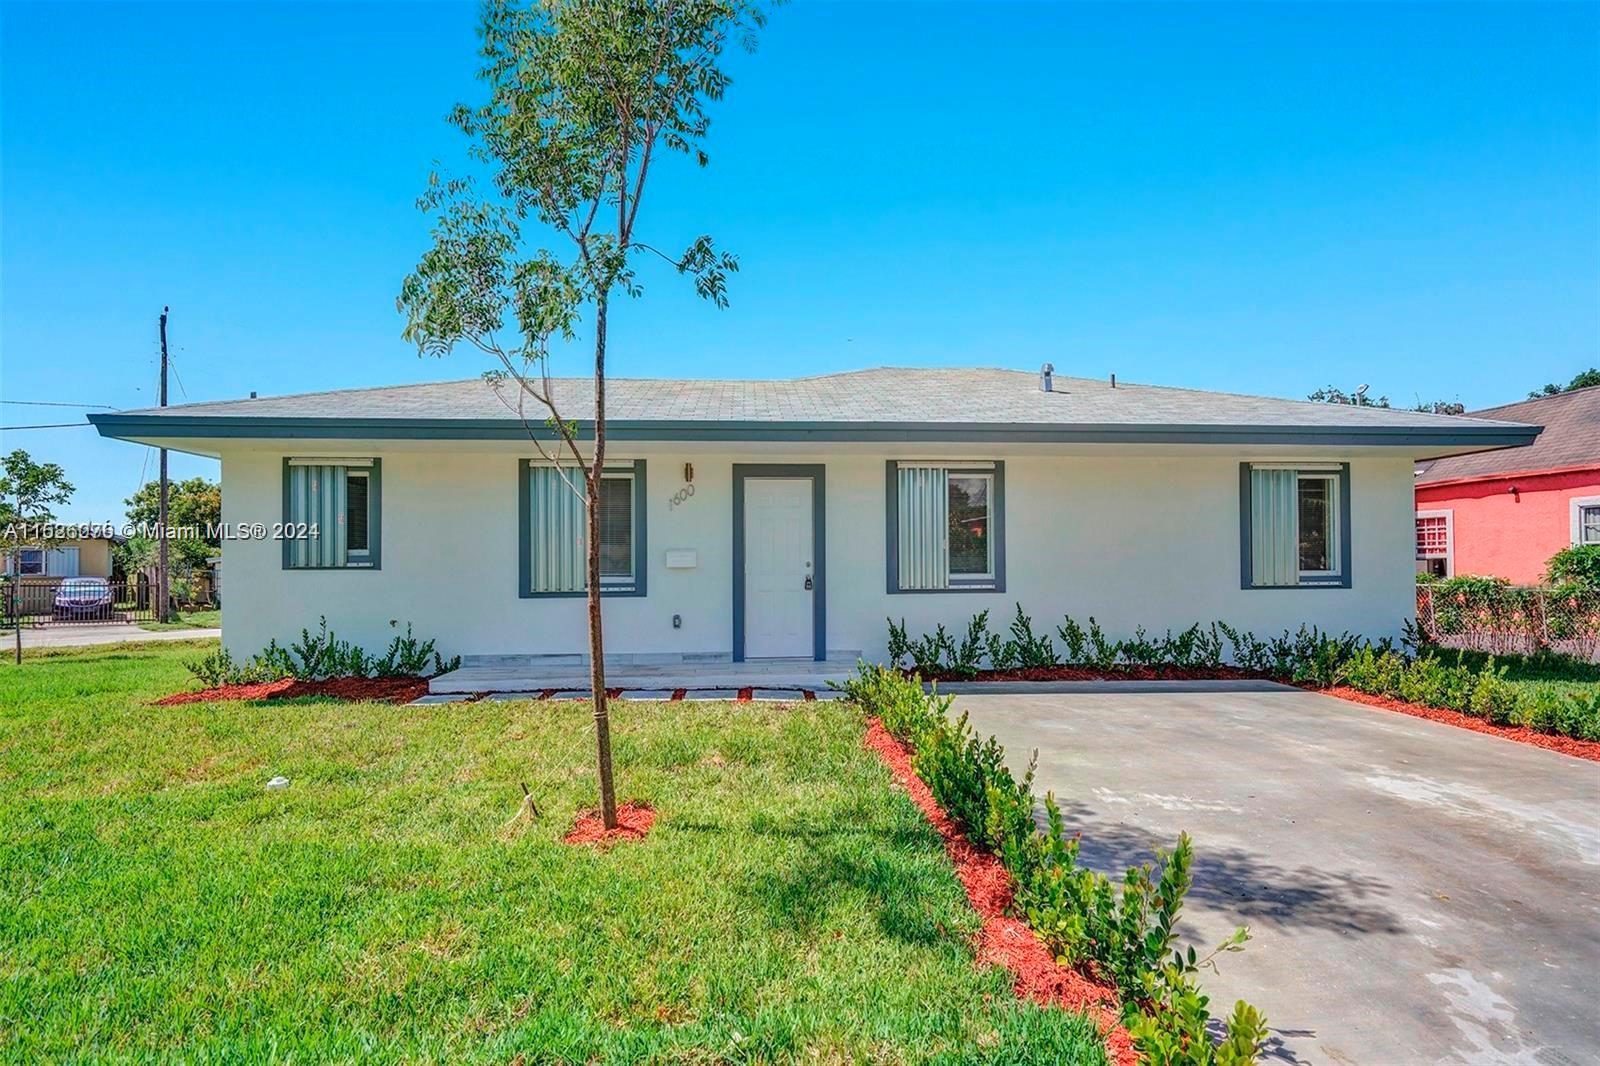 Photo of 1600 NW 152nd Ter in Miami Gardens, FL